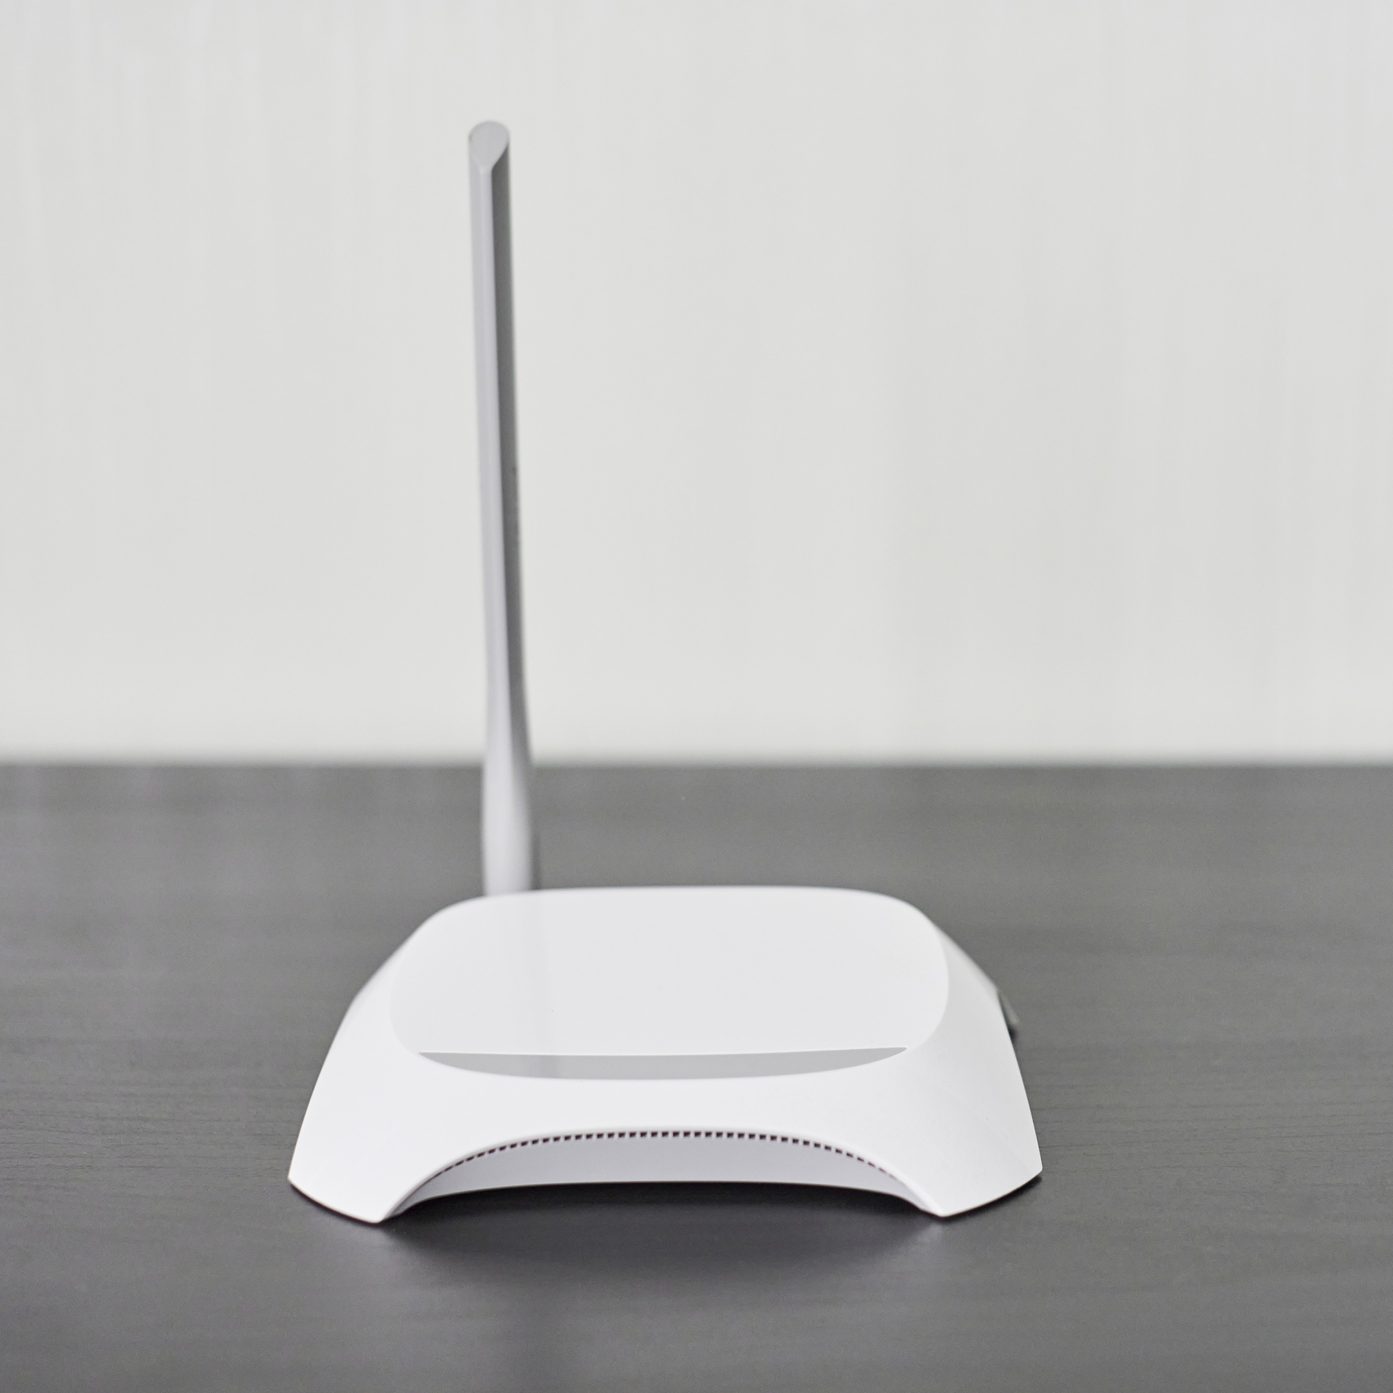 Why You Should Upgrade to a Mesh Router